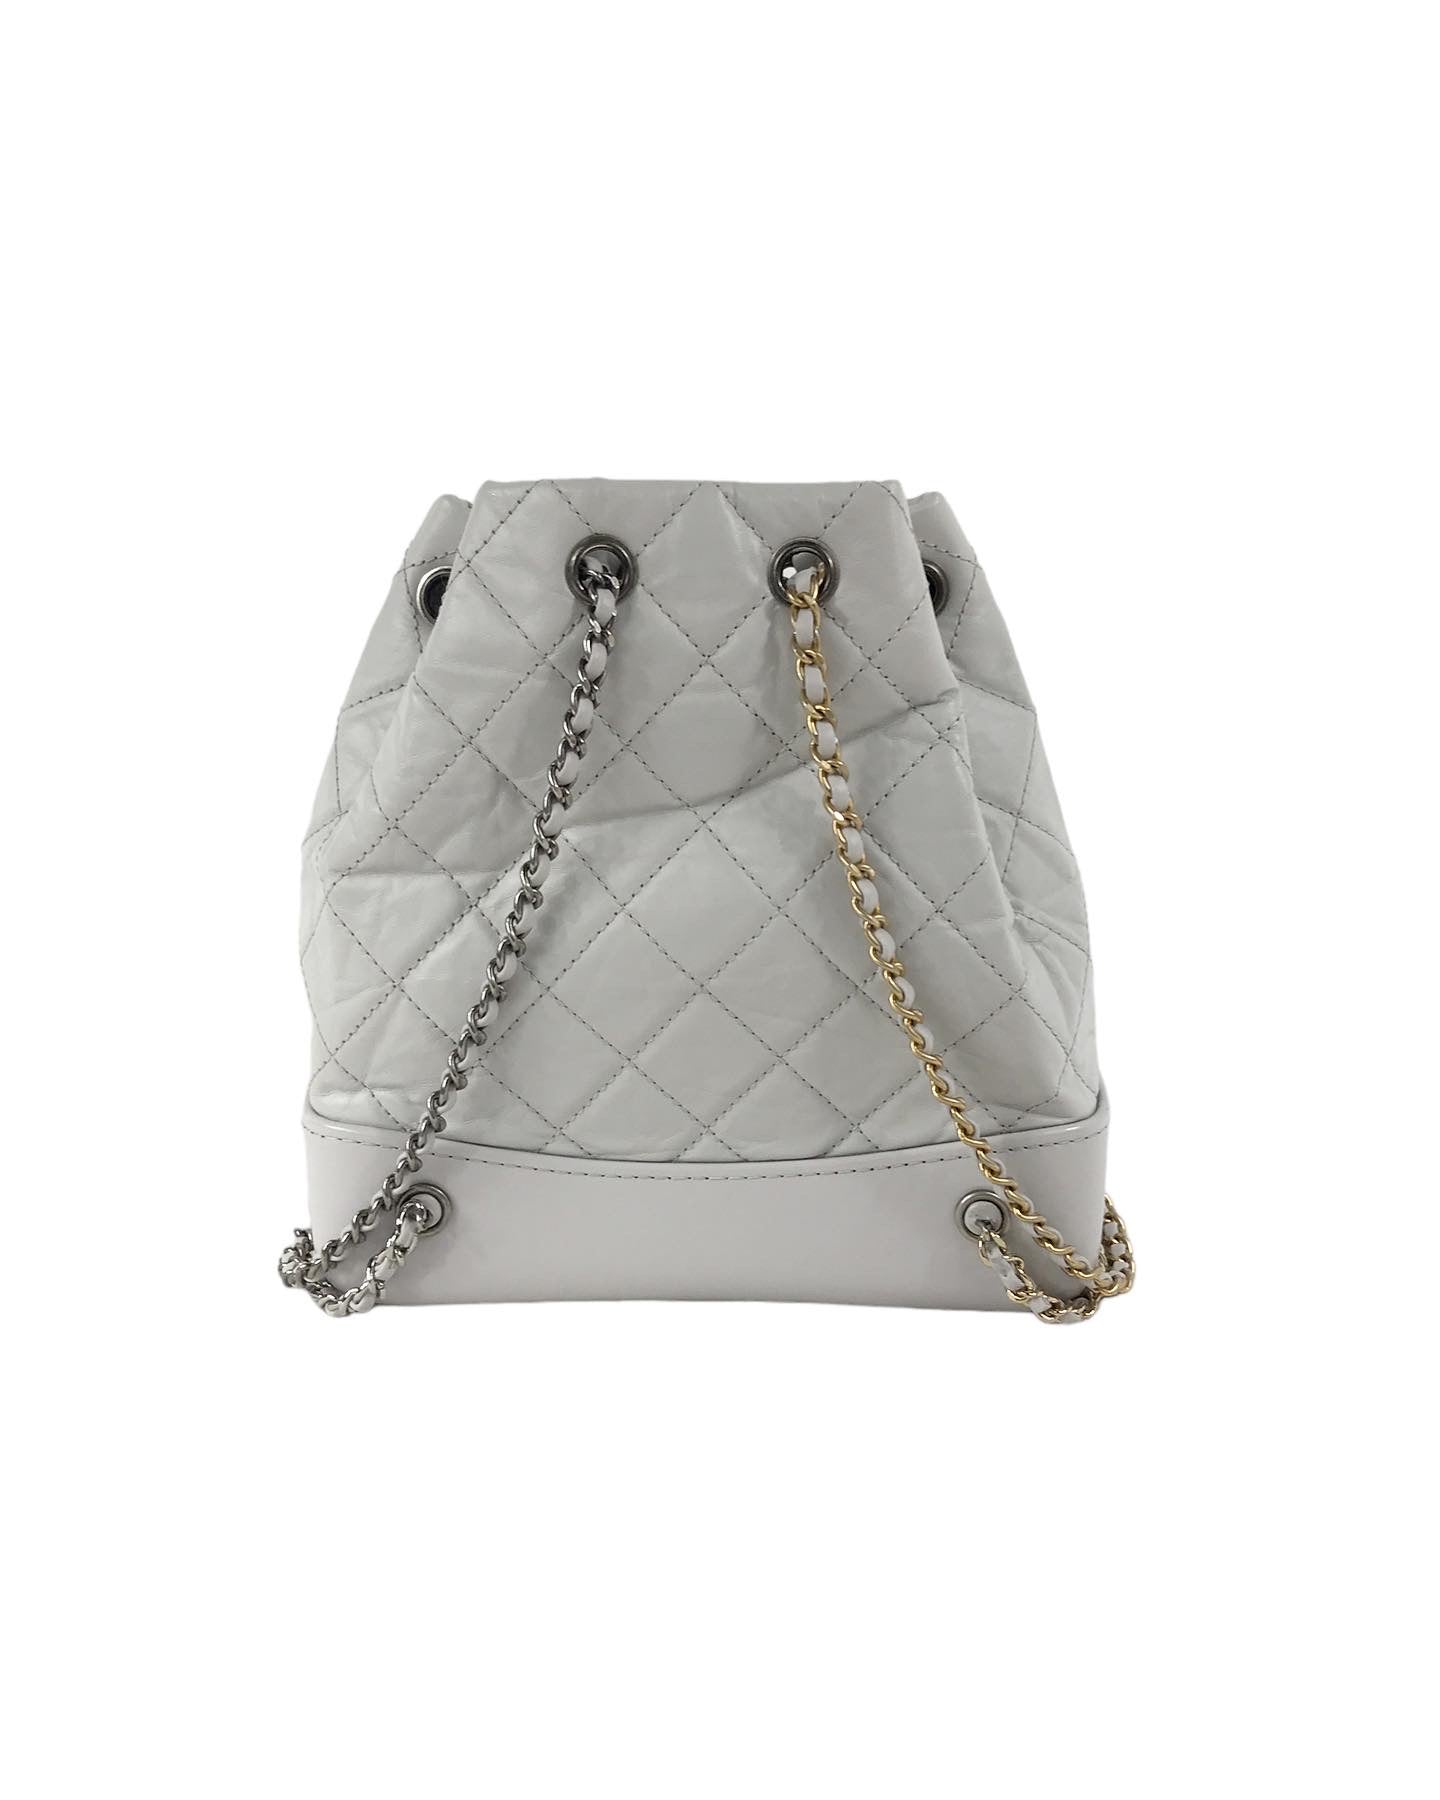 Light Grey Quilted Aged Calfskin Gabrielle Backpack w/ RHW/GHW/AGHW/SHW